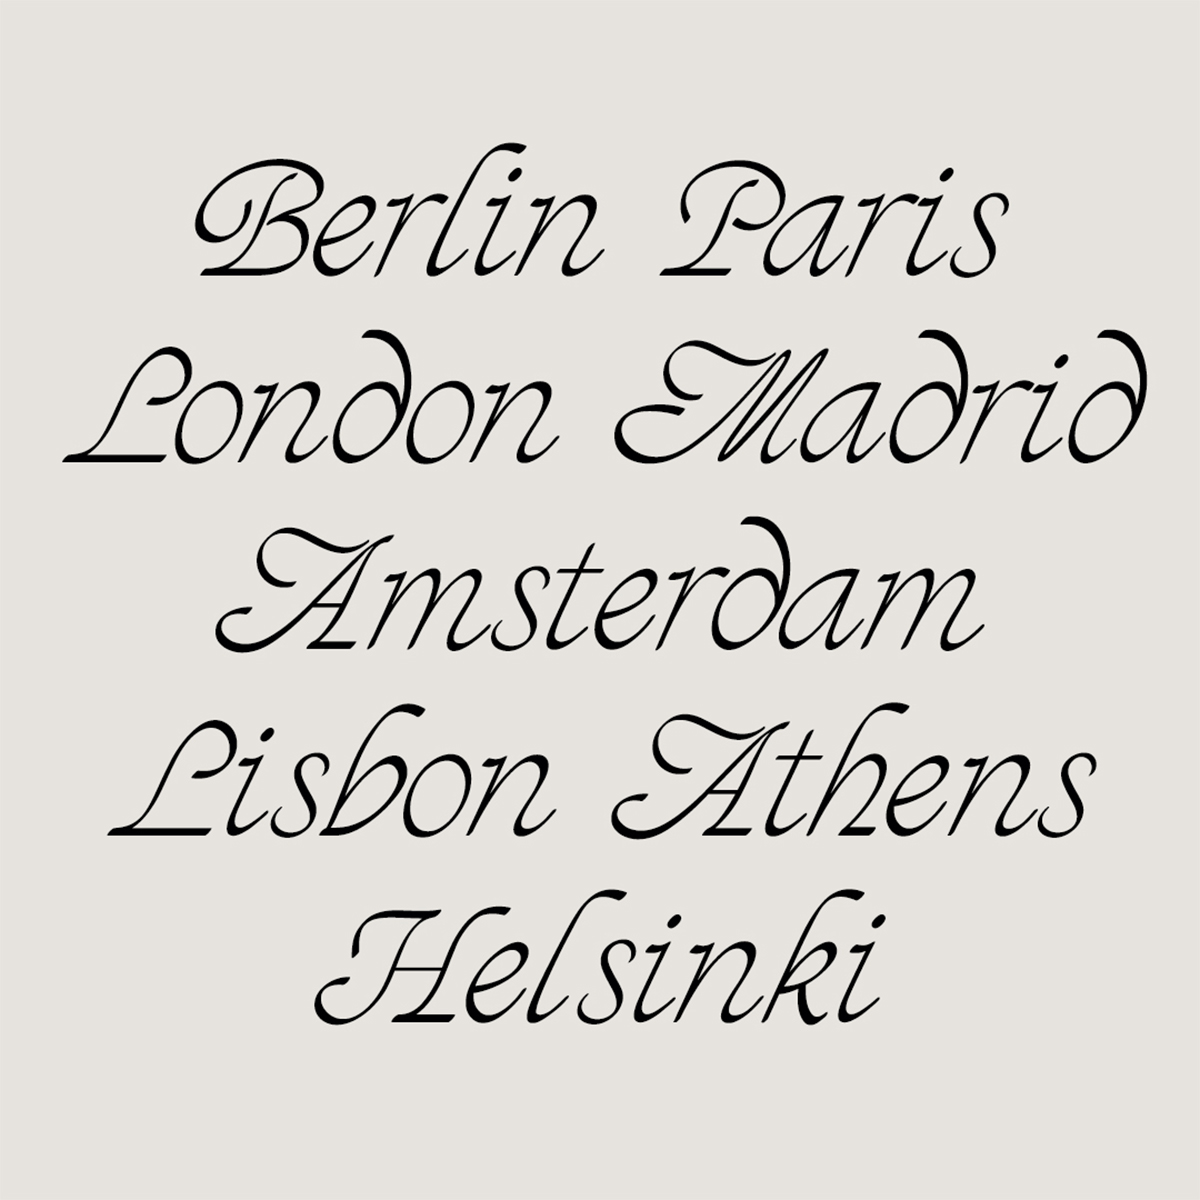 ED Sonar, a new italic script-inspired font by Emyself Design, now available on Type Department.